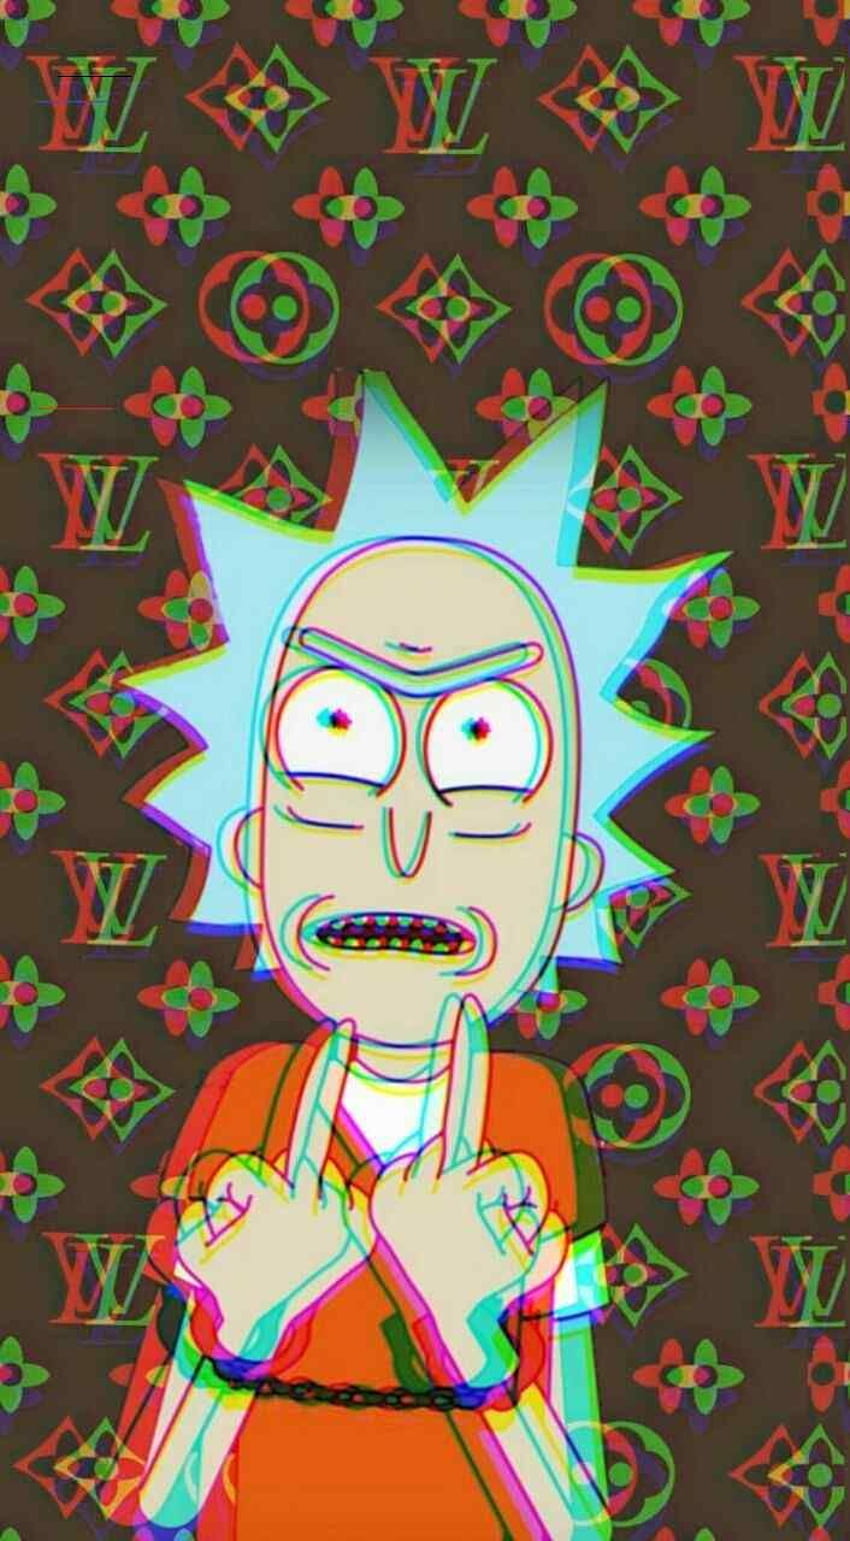 Best Rick and morty iPhone HD Wallpapers  iLikeWallpaper